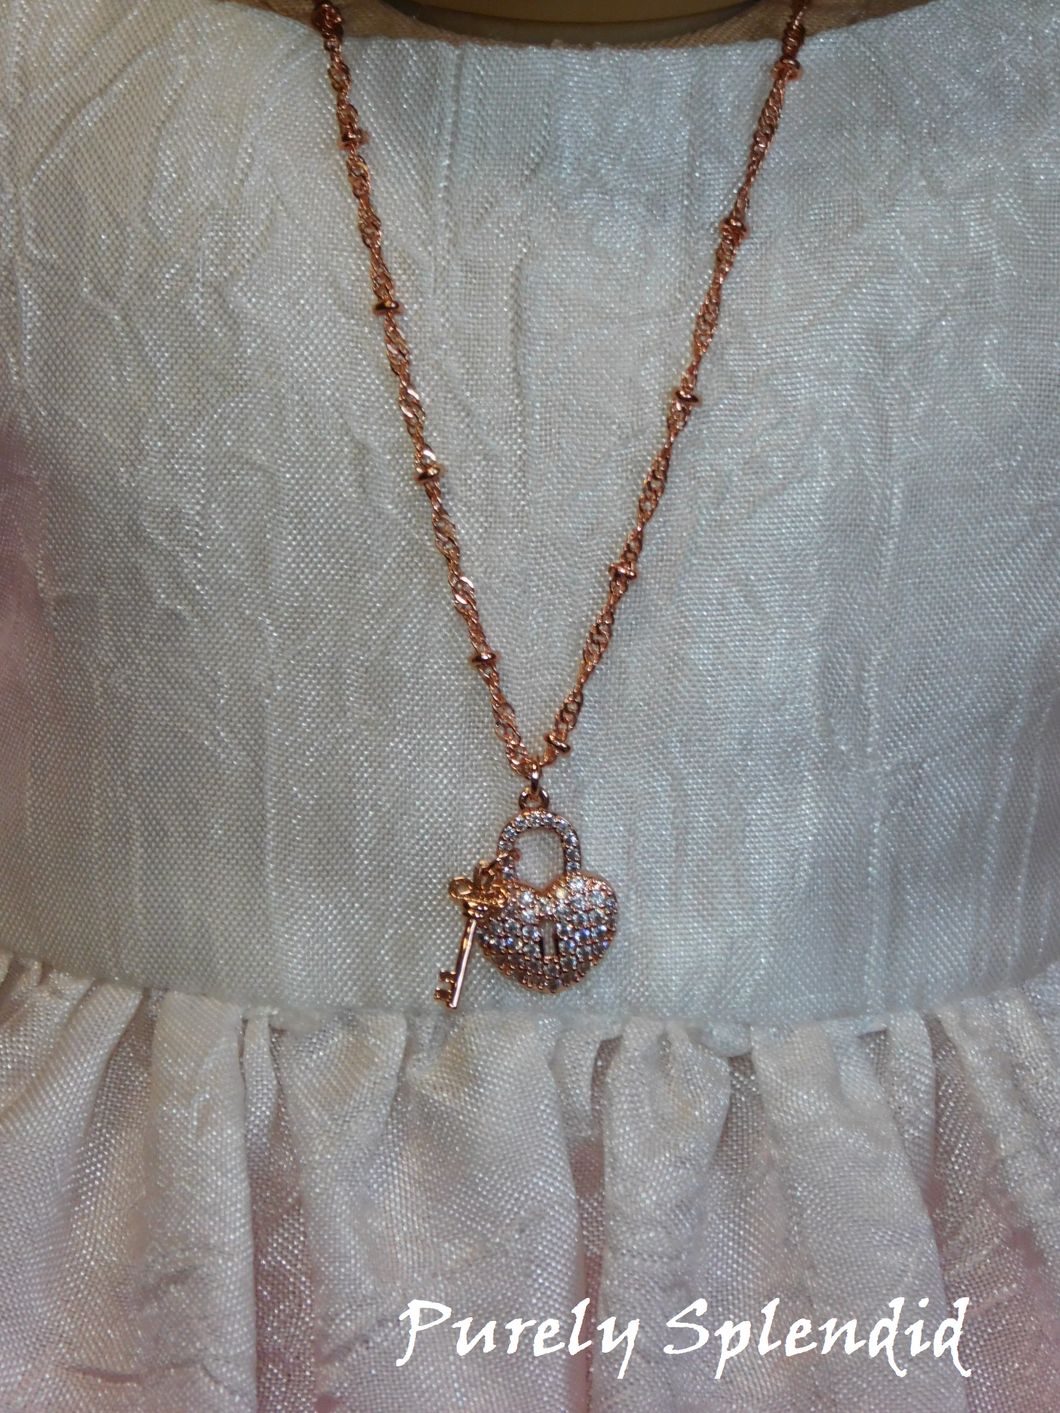 18 inch doll shown wearing this long Rose Gold Heart Lock and Key Necklace